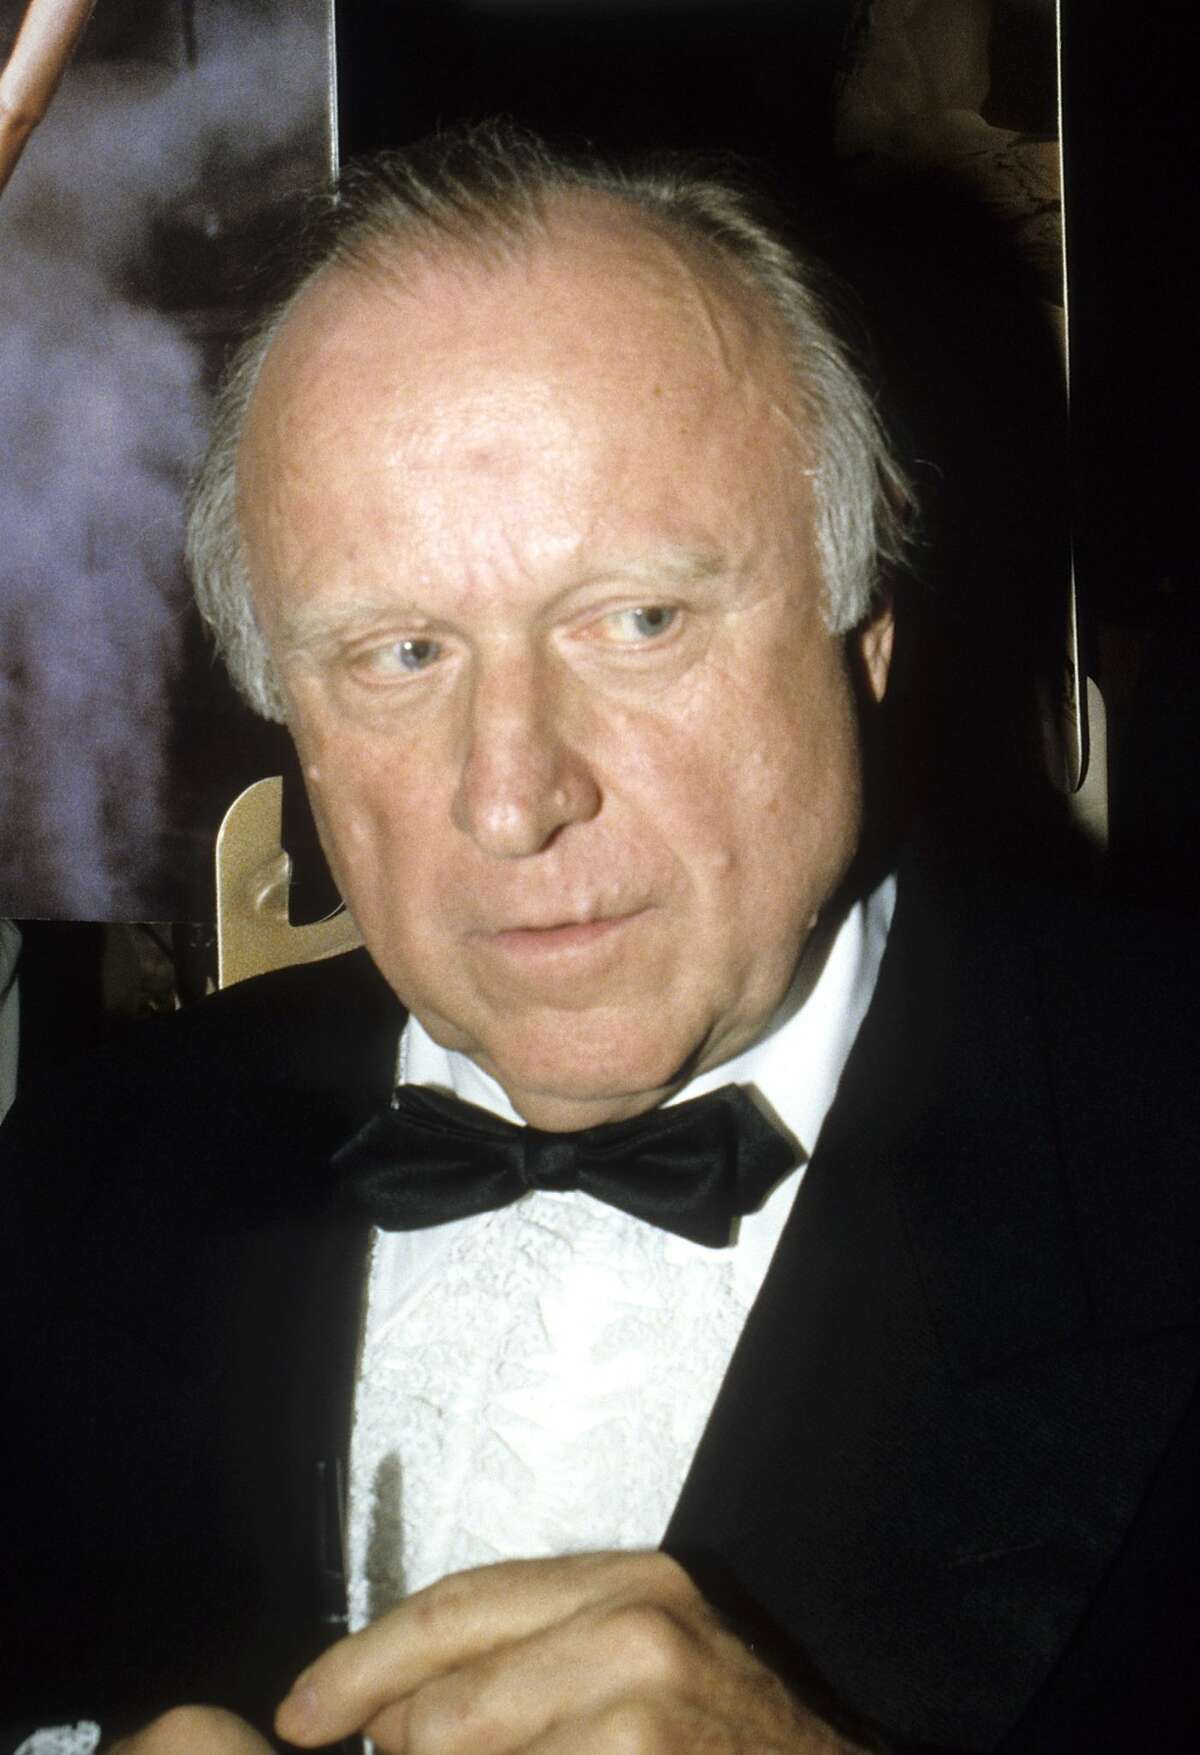 WASHINGTON, DC - DECEMBER 3: Author Frank Herbert attends the "Dune" Washington DC Premiere on December 3, 1984 at the Eisenhower Theatre, Kennedy Center in Washington, DC. (Photo by Ron Galella, Ltd./Ron Galella Collection via Getty Images)